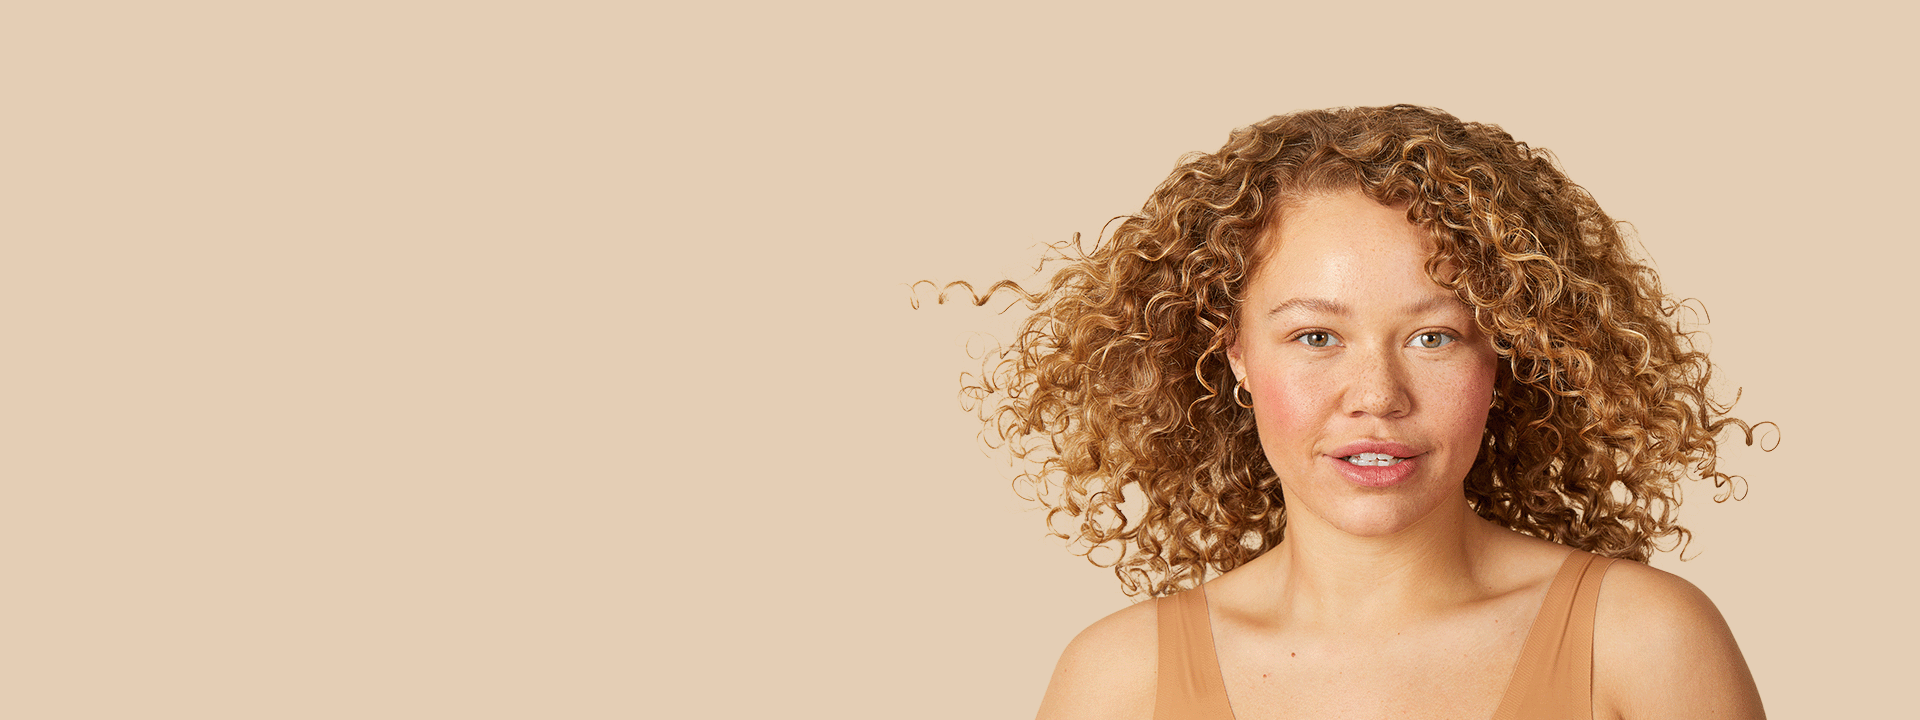 close up of a woman with strawberry-blonde curly hair facing the camera